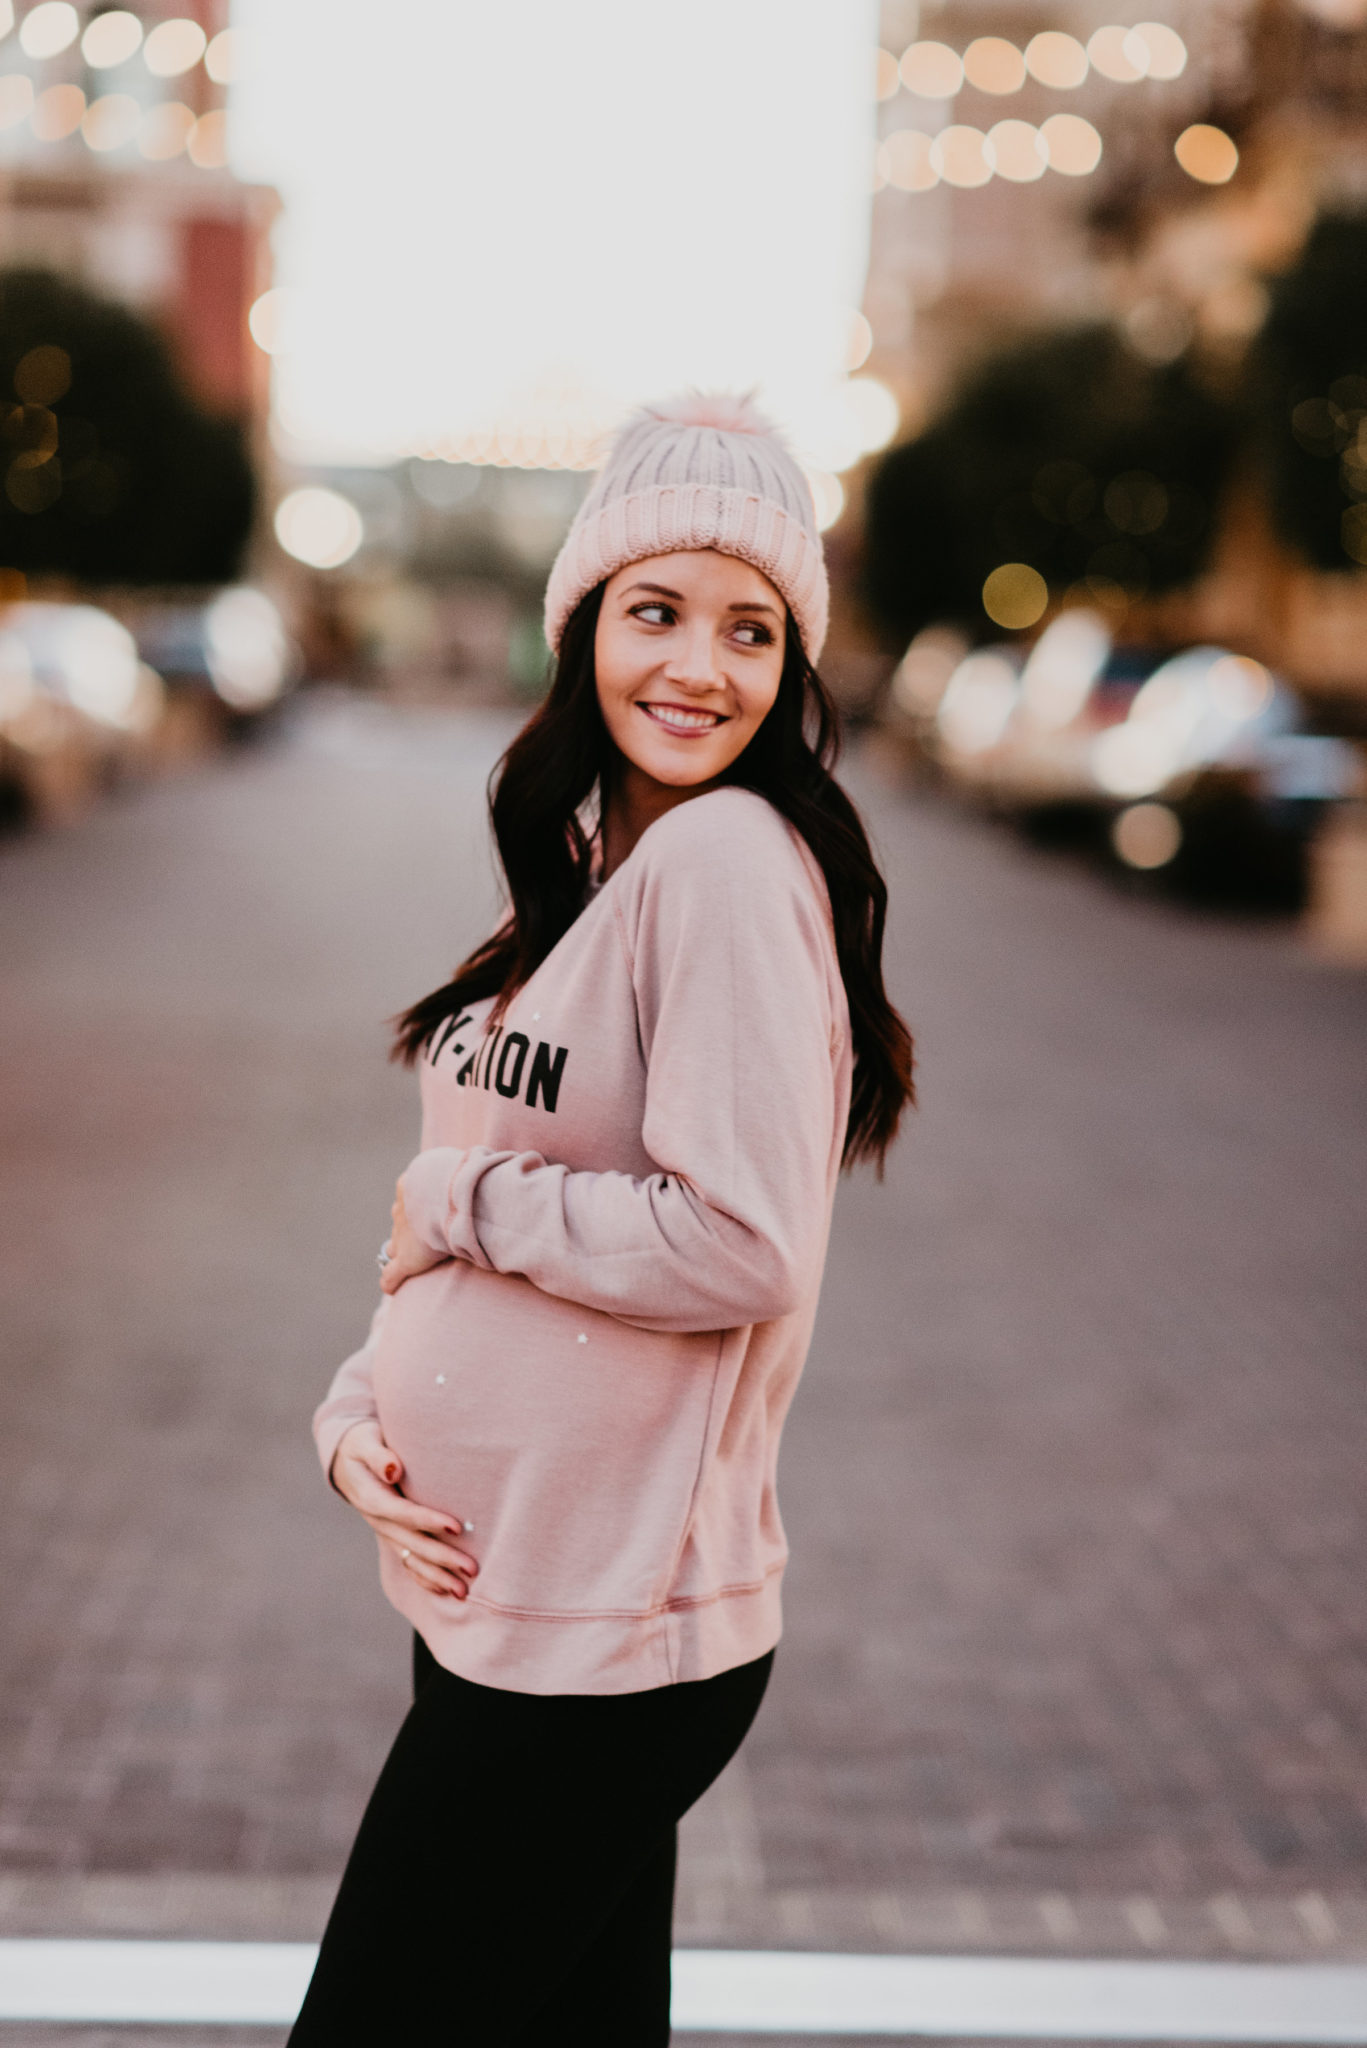 comfy pregnancy outfit and a list of ways to treat yourself - 15 Ways to Treat Yourself by popular Las Vegas style blogger Outfits & Outings